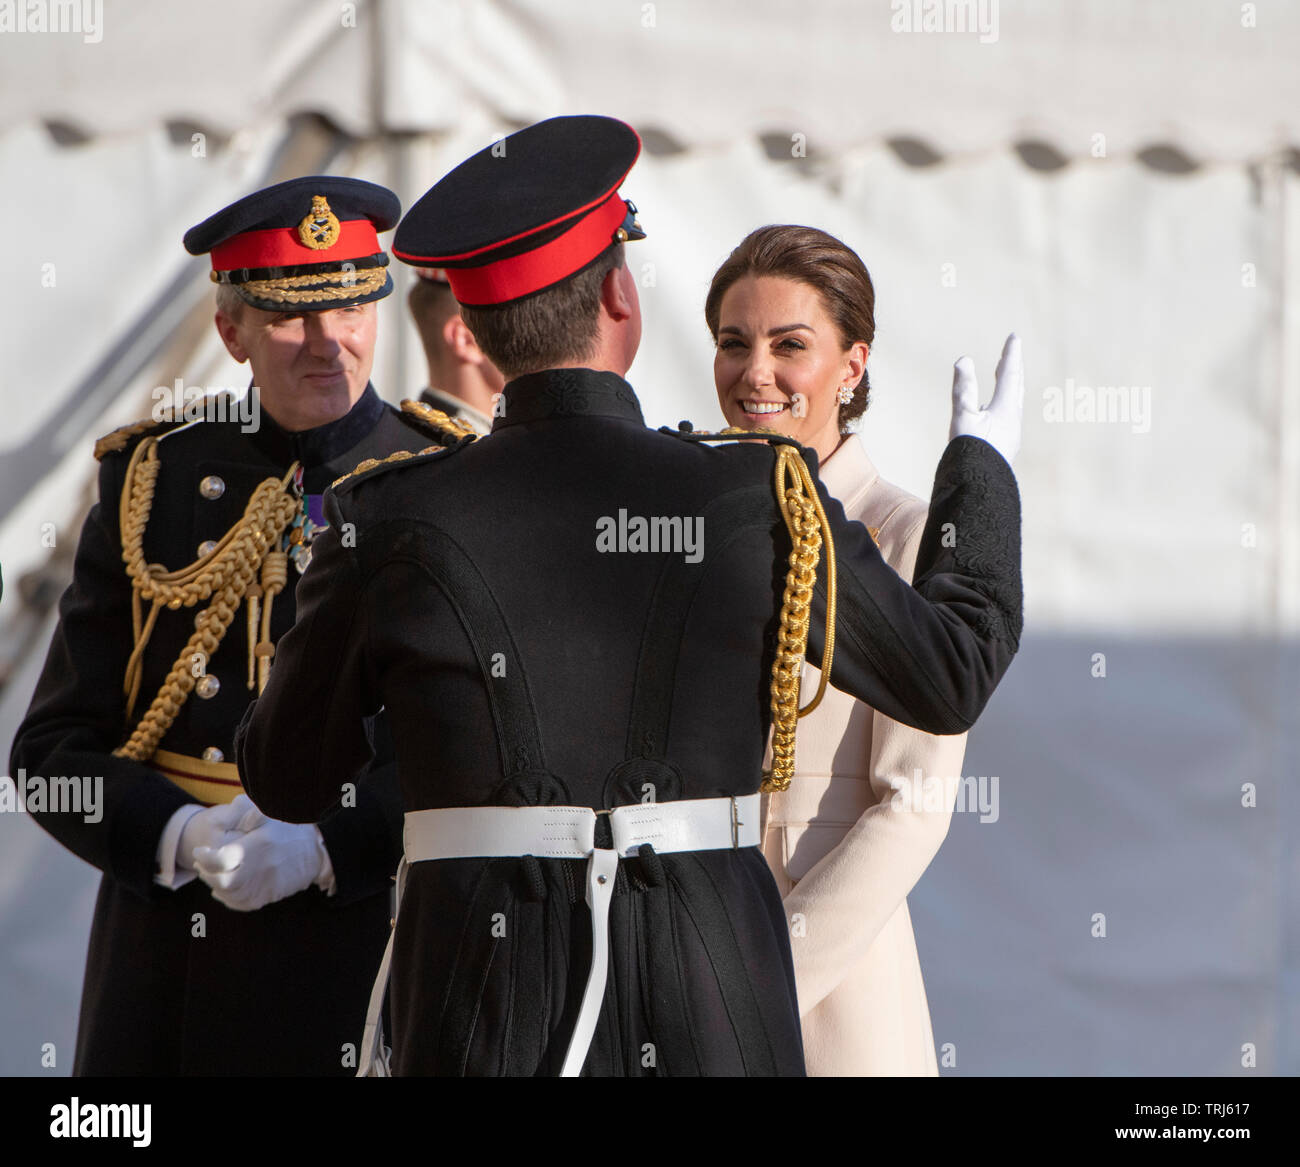 Horse Guards Parade, London, UK. 6th June 2019. HRH The Duchess of Cambridge attends the annual British Army Household Division evening military music spectacular, Beating Retreat. Credit: Malcolm Park/Alamy Live News. Stock Photo